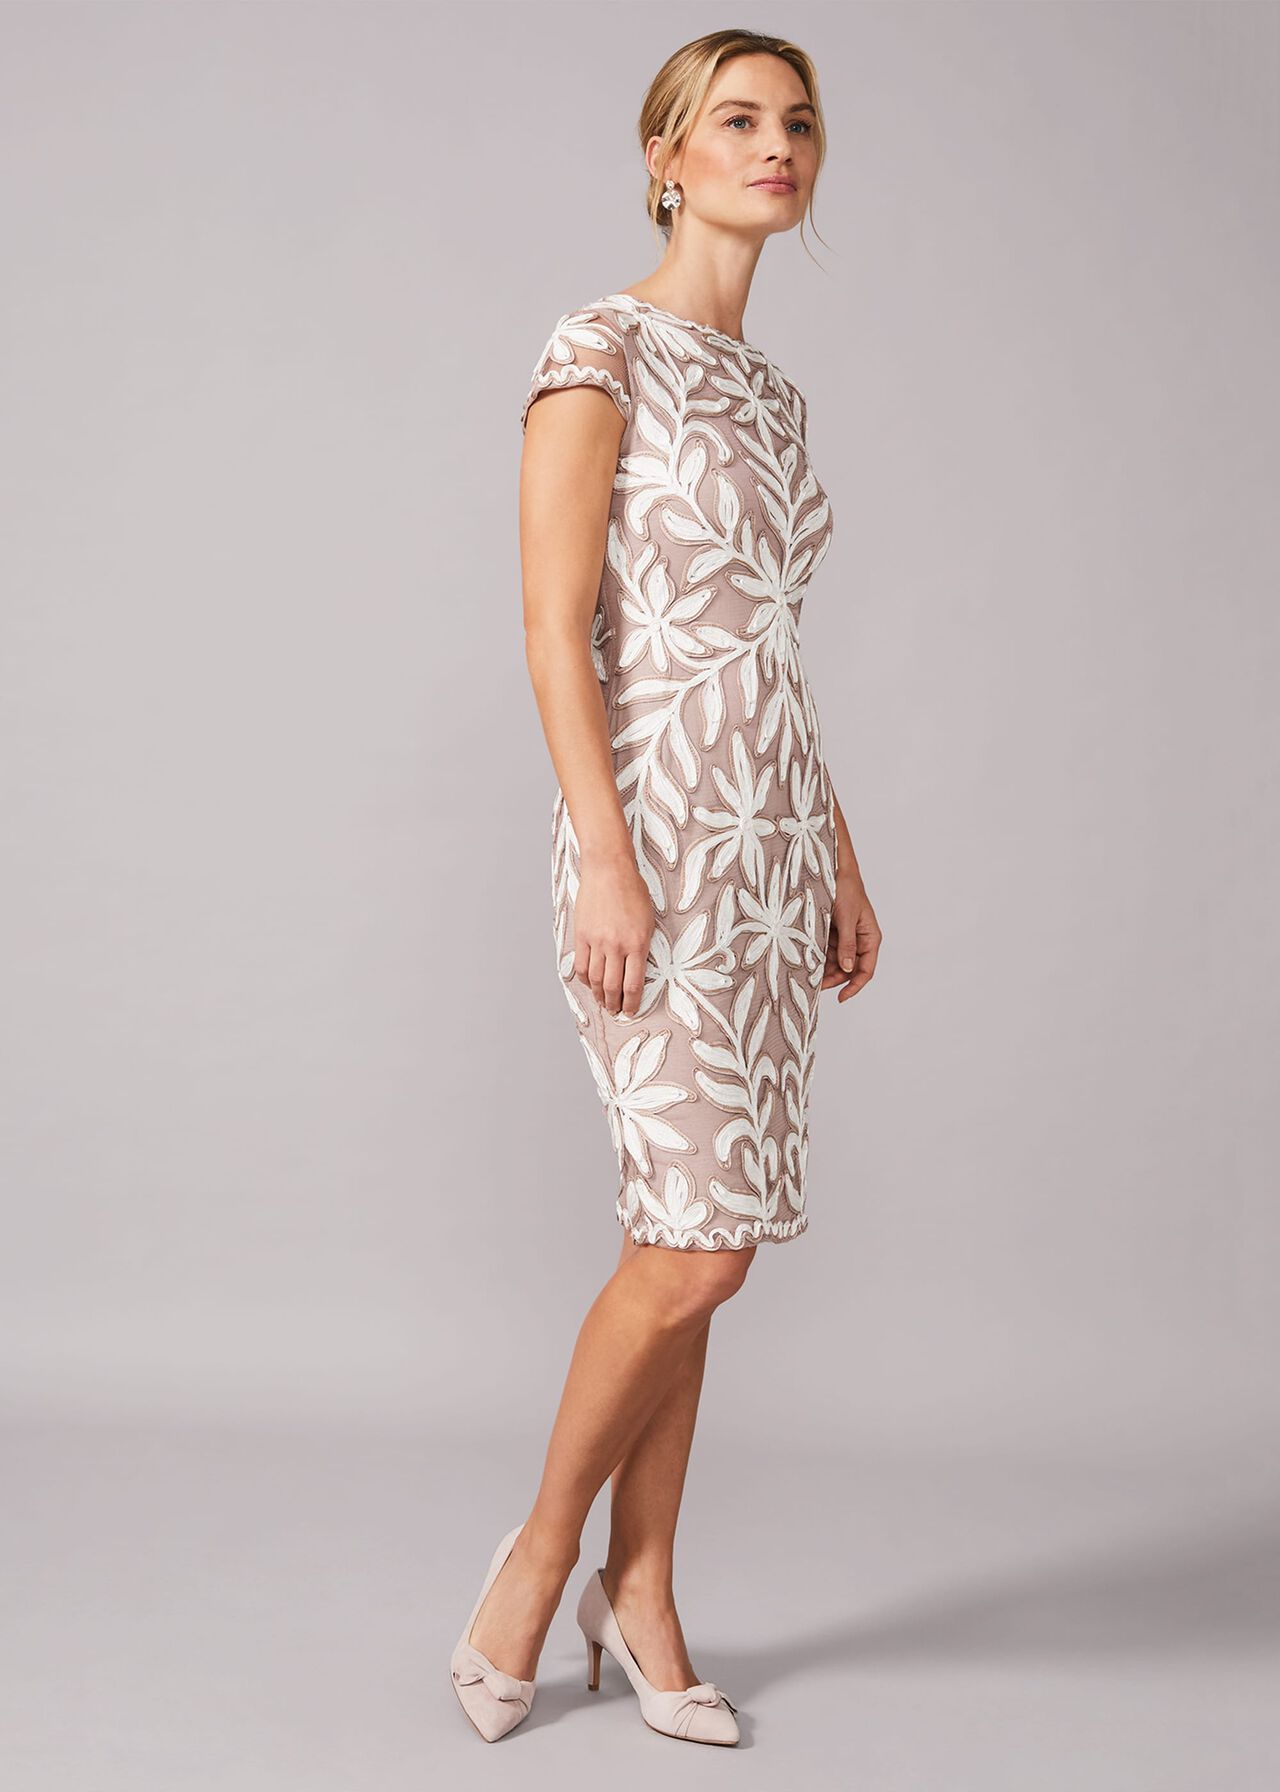 Isobel Tapework Lace Fitted Dress